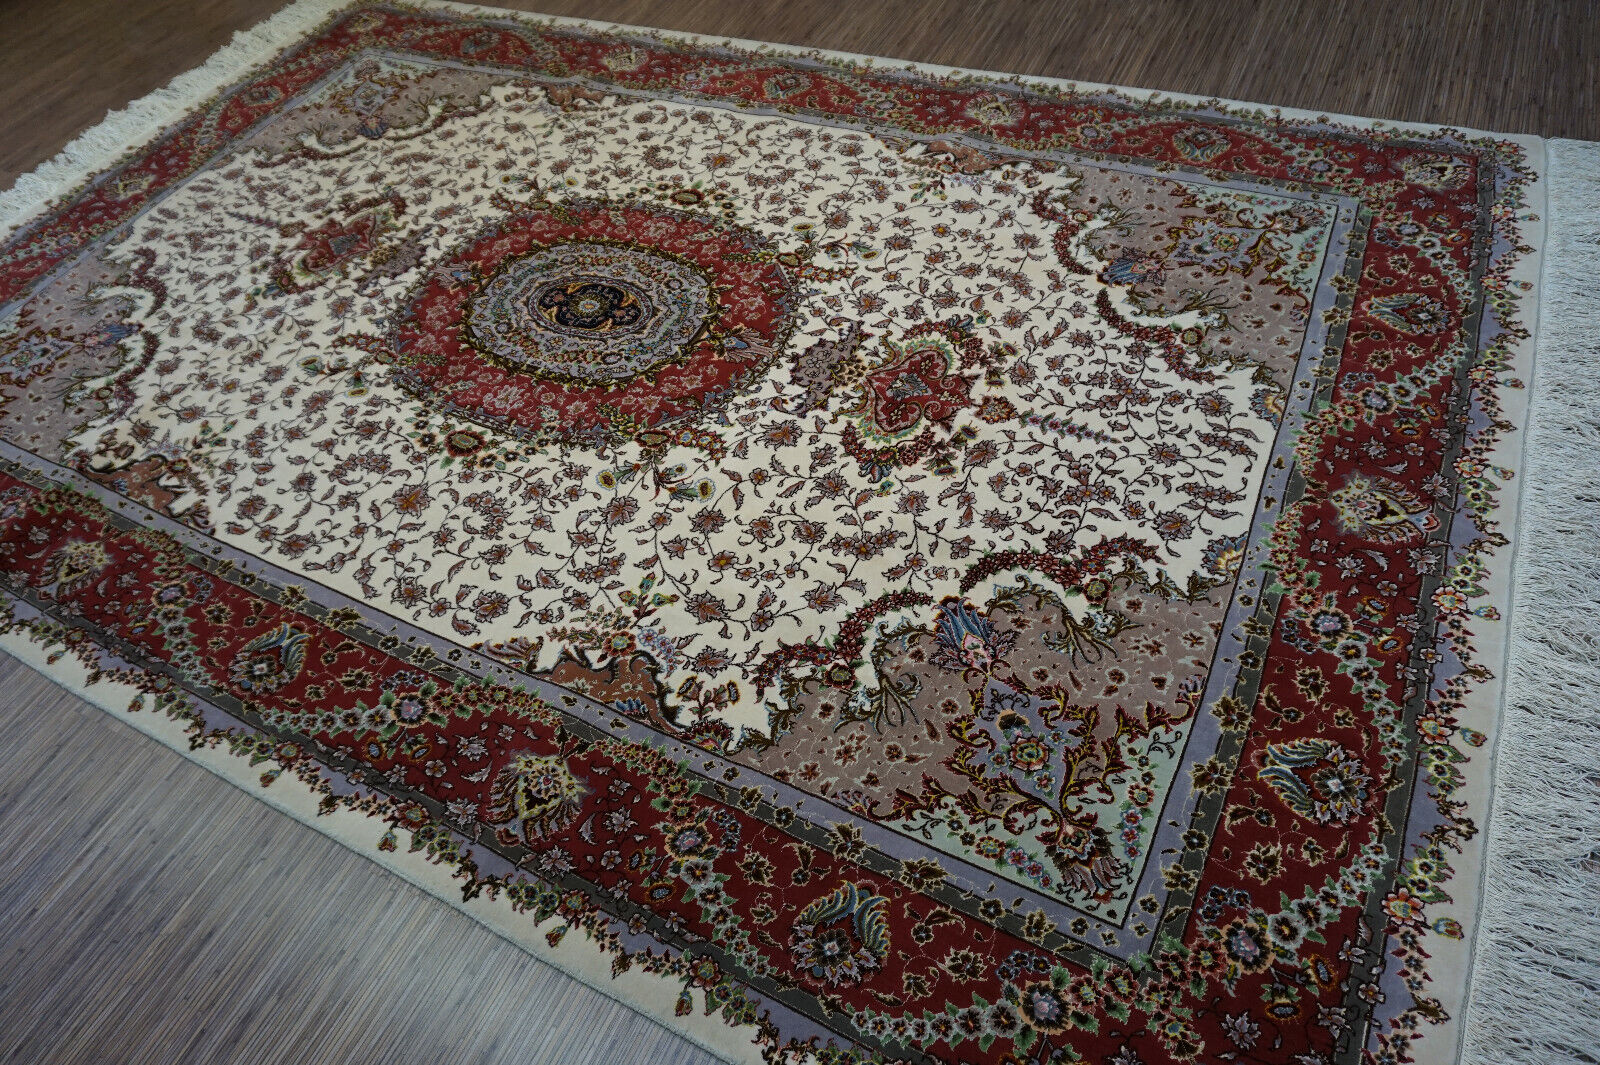 Detailed view of the intricate geometric patterns and texture variation on the rug